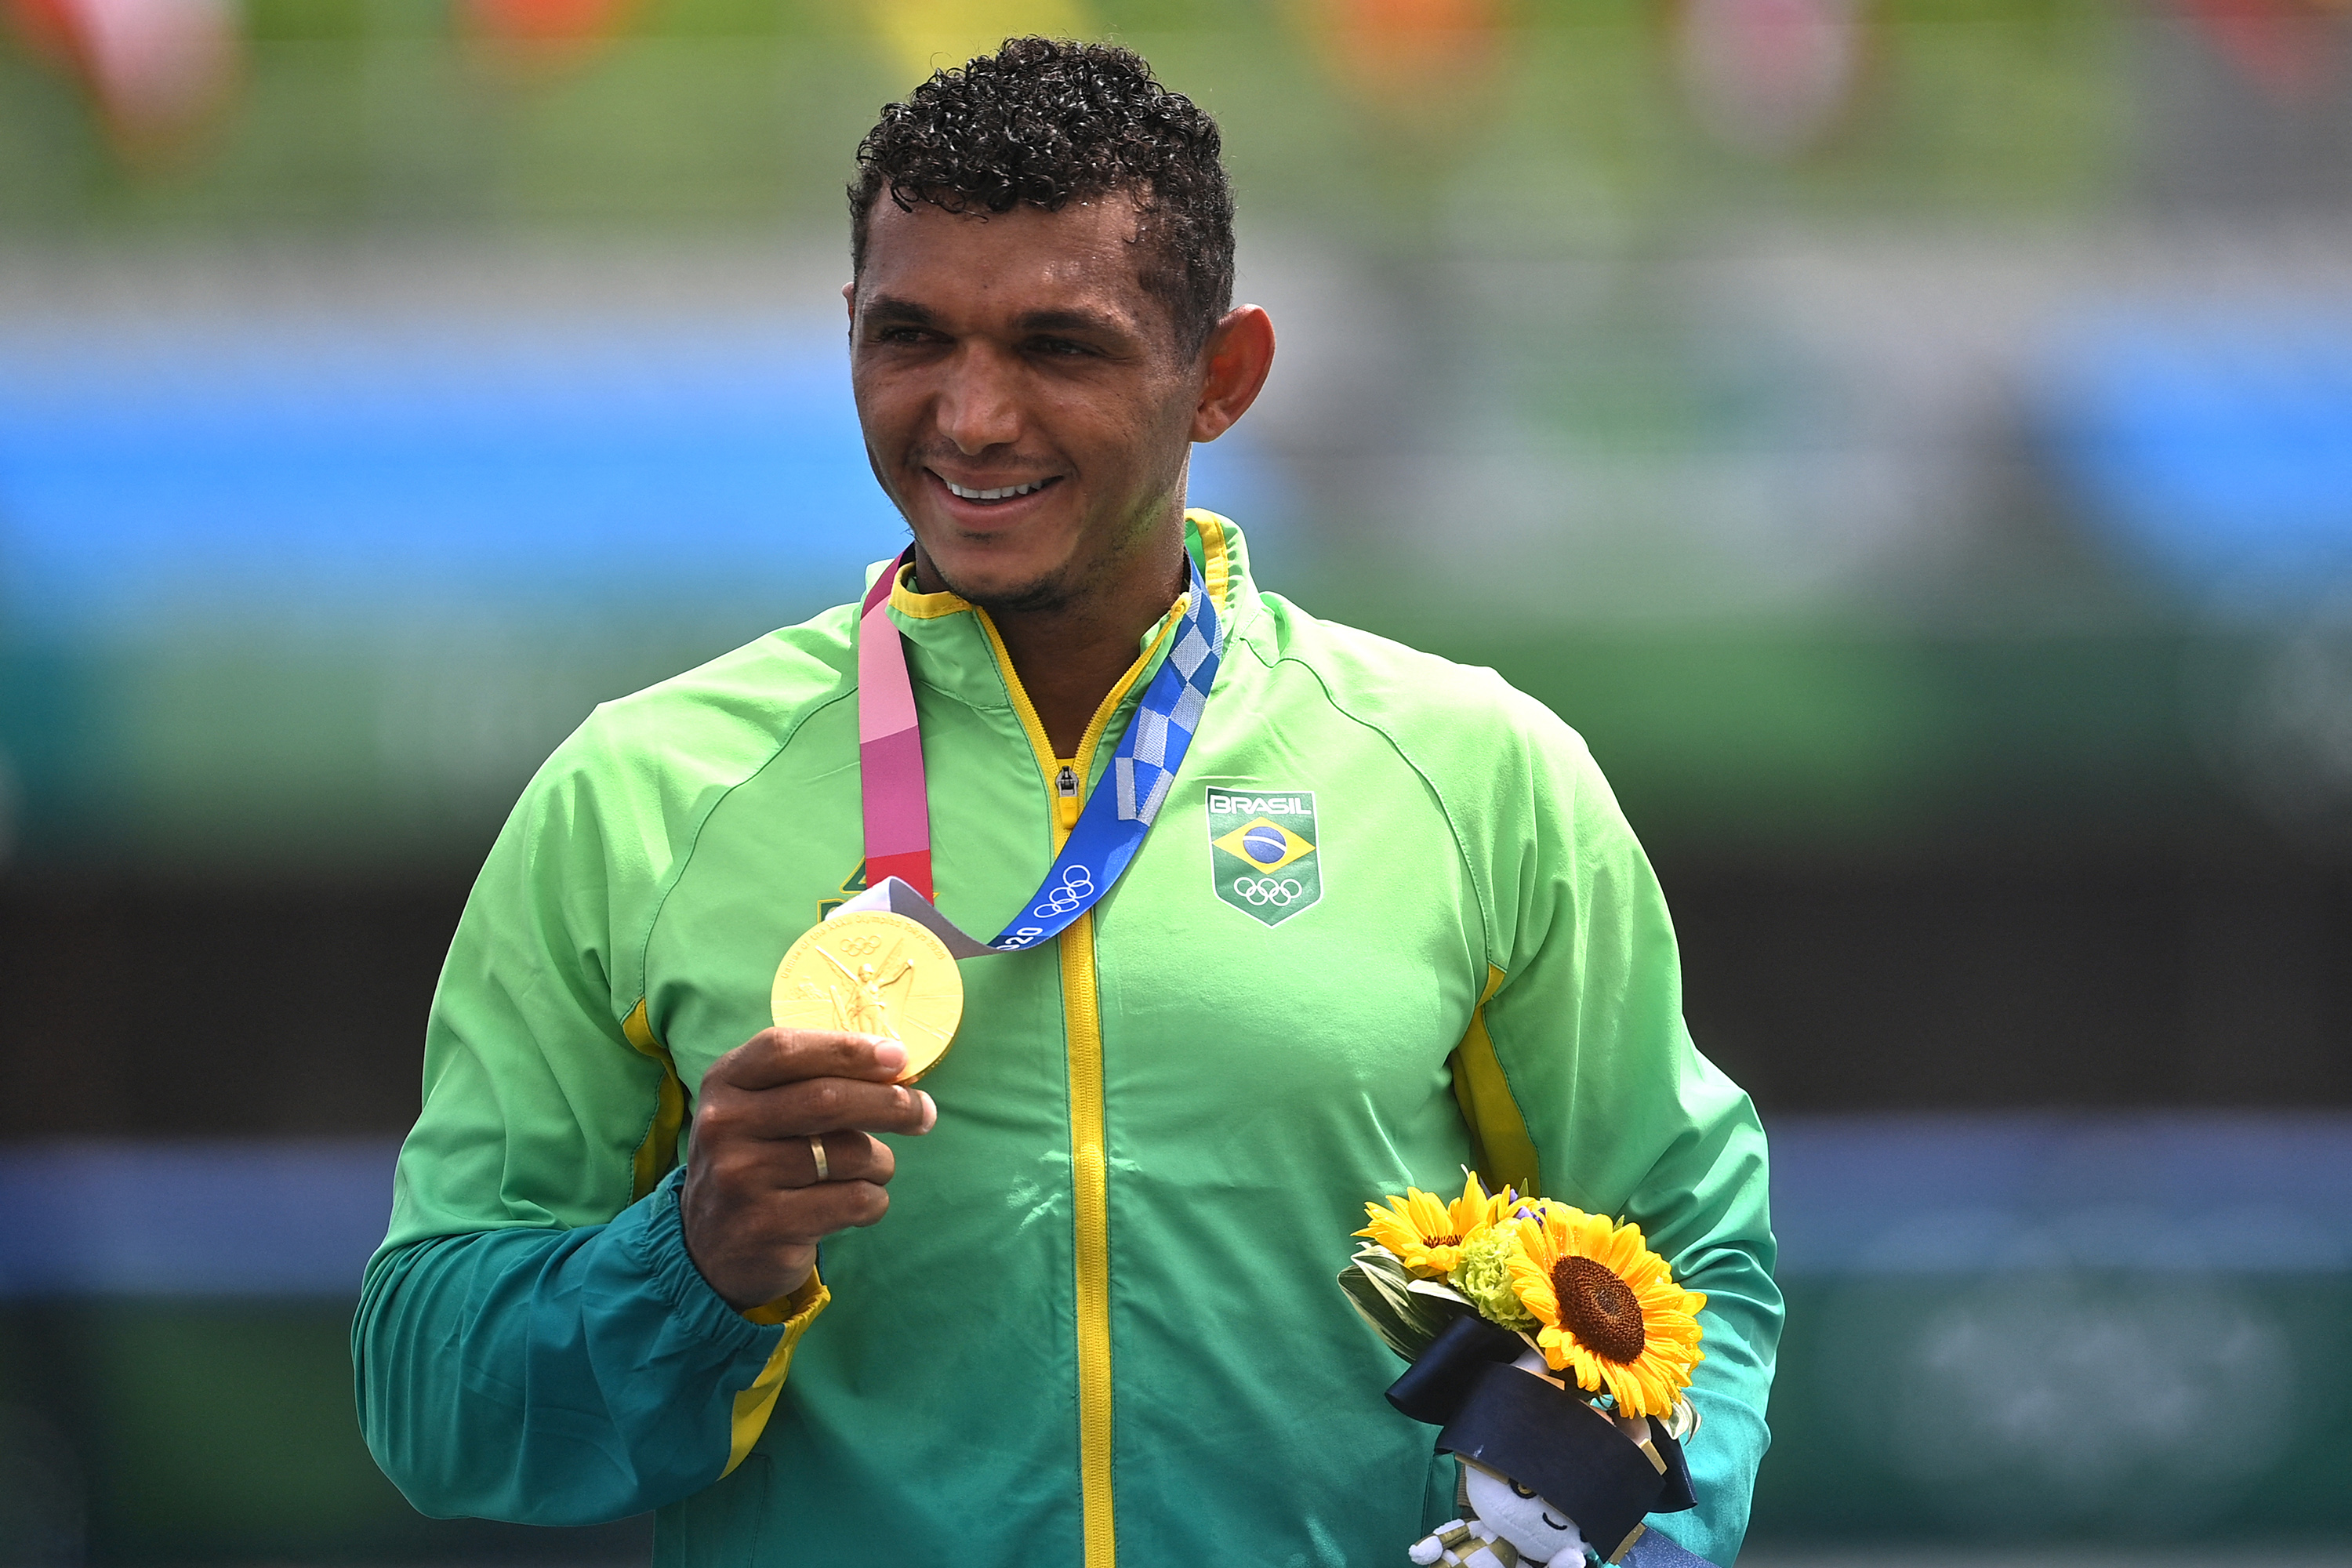 Gold medallist Brazil's Isaquias Queiroz dos Santos celebrates on podium during medals ceremony for the men's canoe single 1000m final during the Tokyo 2020 Olympic Games at Sea Forest Waterway in Tokyo on August 7, 2021. (Photo by Philip FONG / AFP)